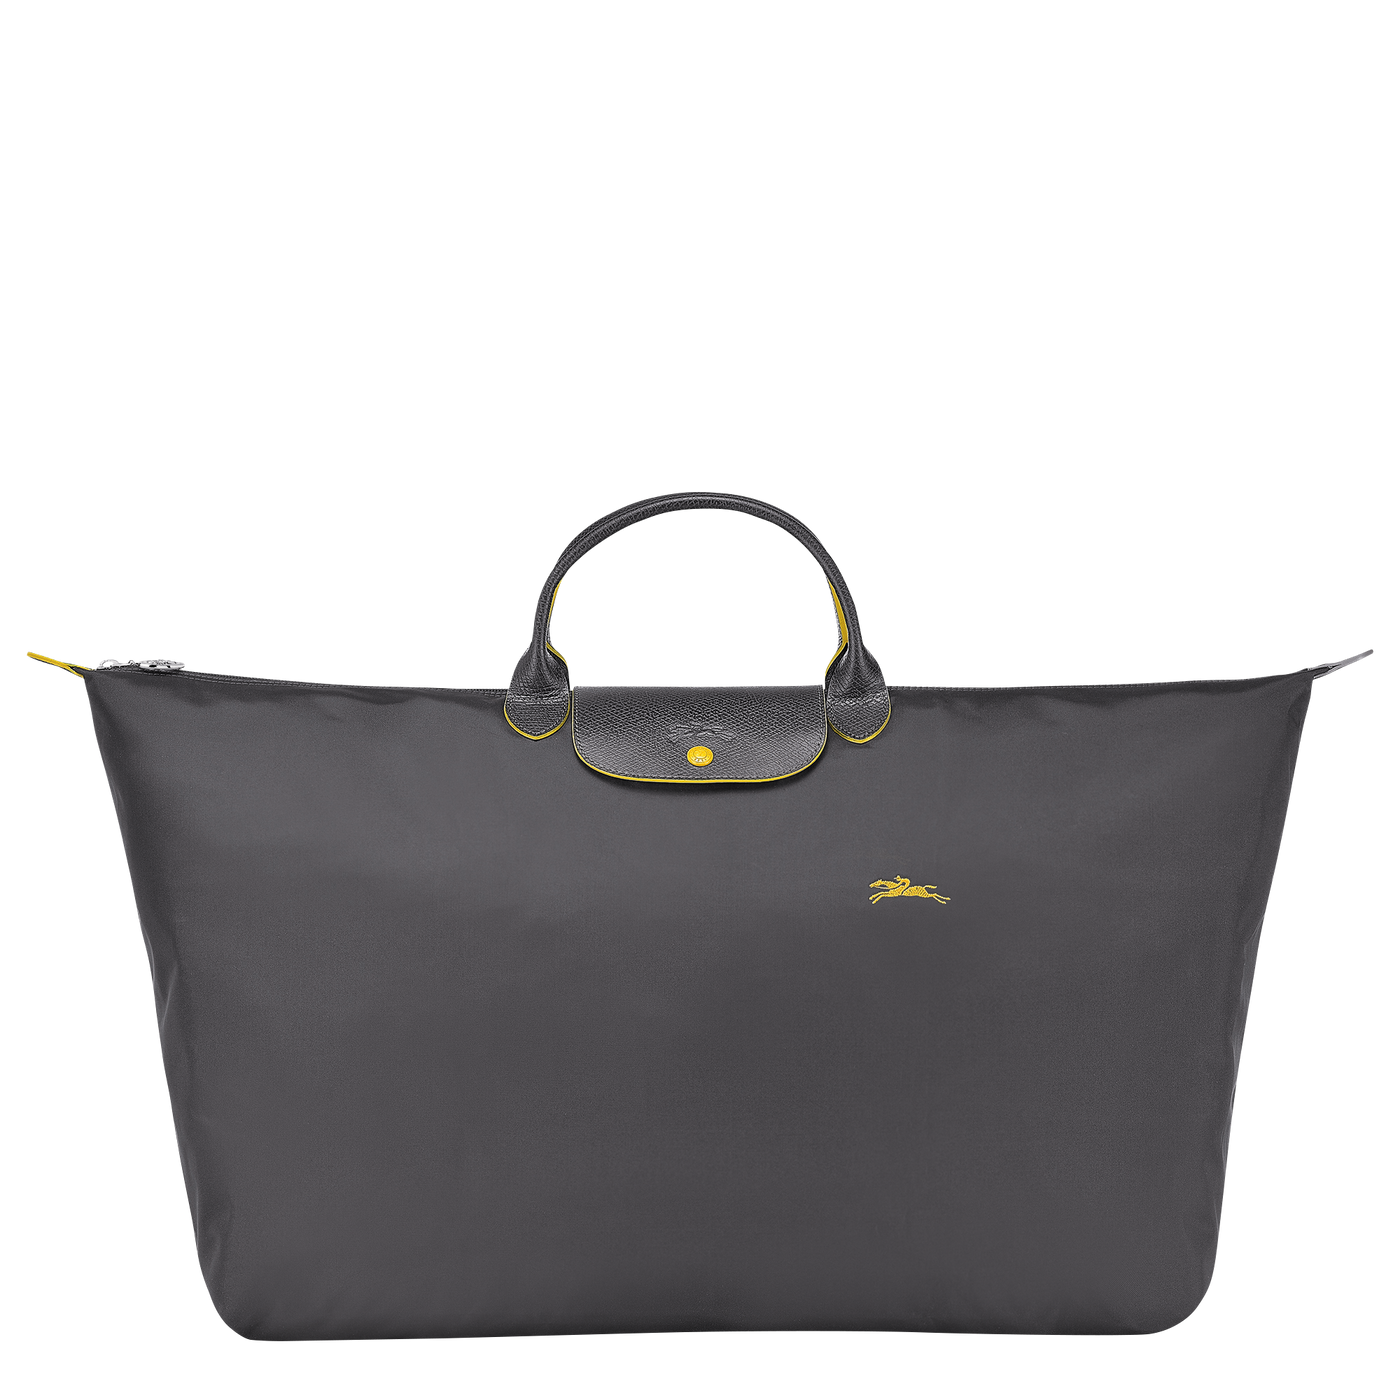 Shop The Latest Collection Of Longchamp Le Pliage Club Travel Bag-1625619 In Lebanon